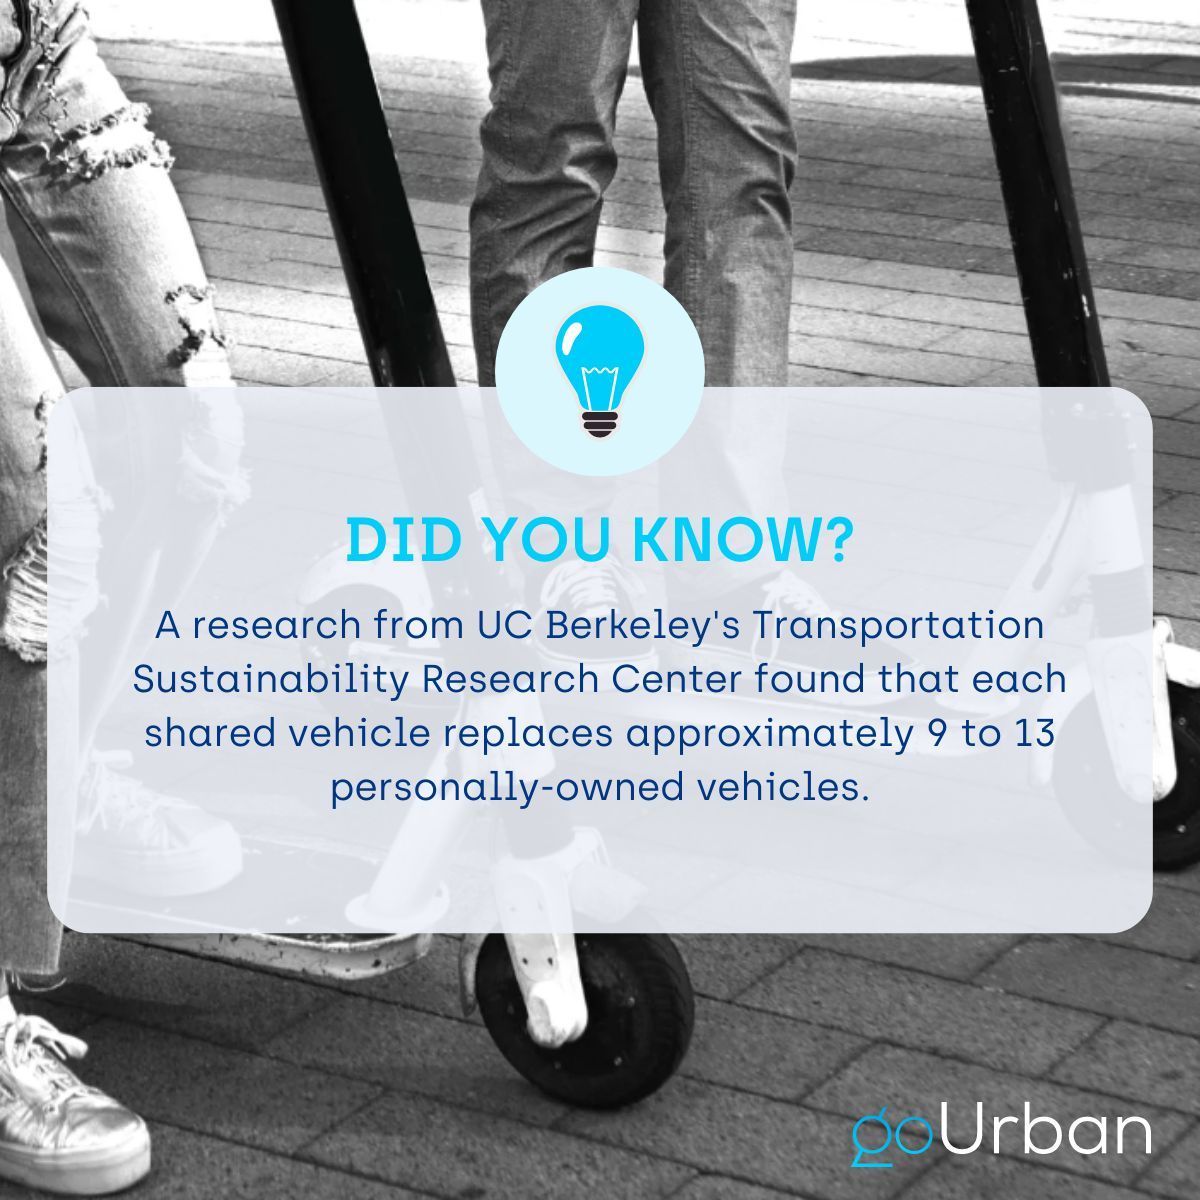 According to UC Berkeley's Transportation Sustainability Research Center, each shared vehicle has the capacity to replace approximately 9 to 13 personally-owned vehicles, showing the pivotal role that shared mobility plays in redefining the way we move. #goUrban #CarSharing